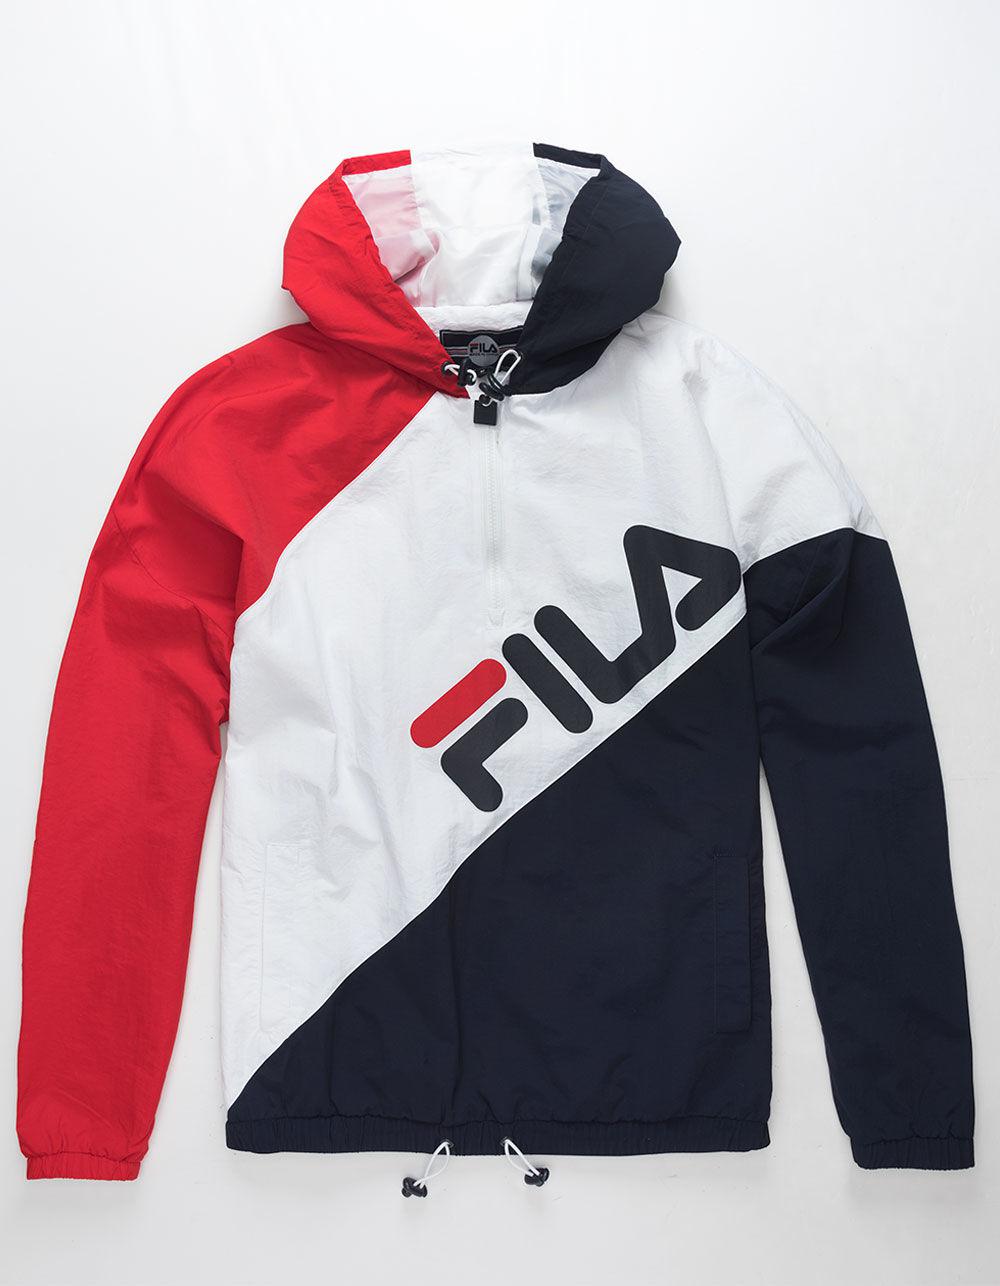 fila red and white jacket